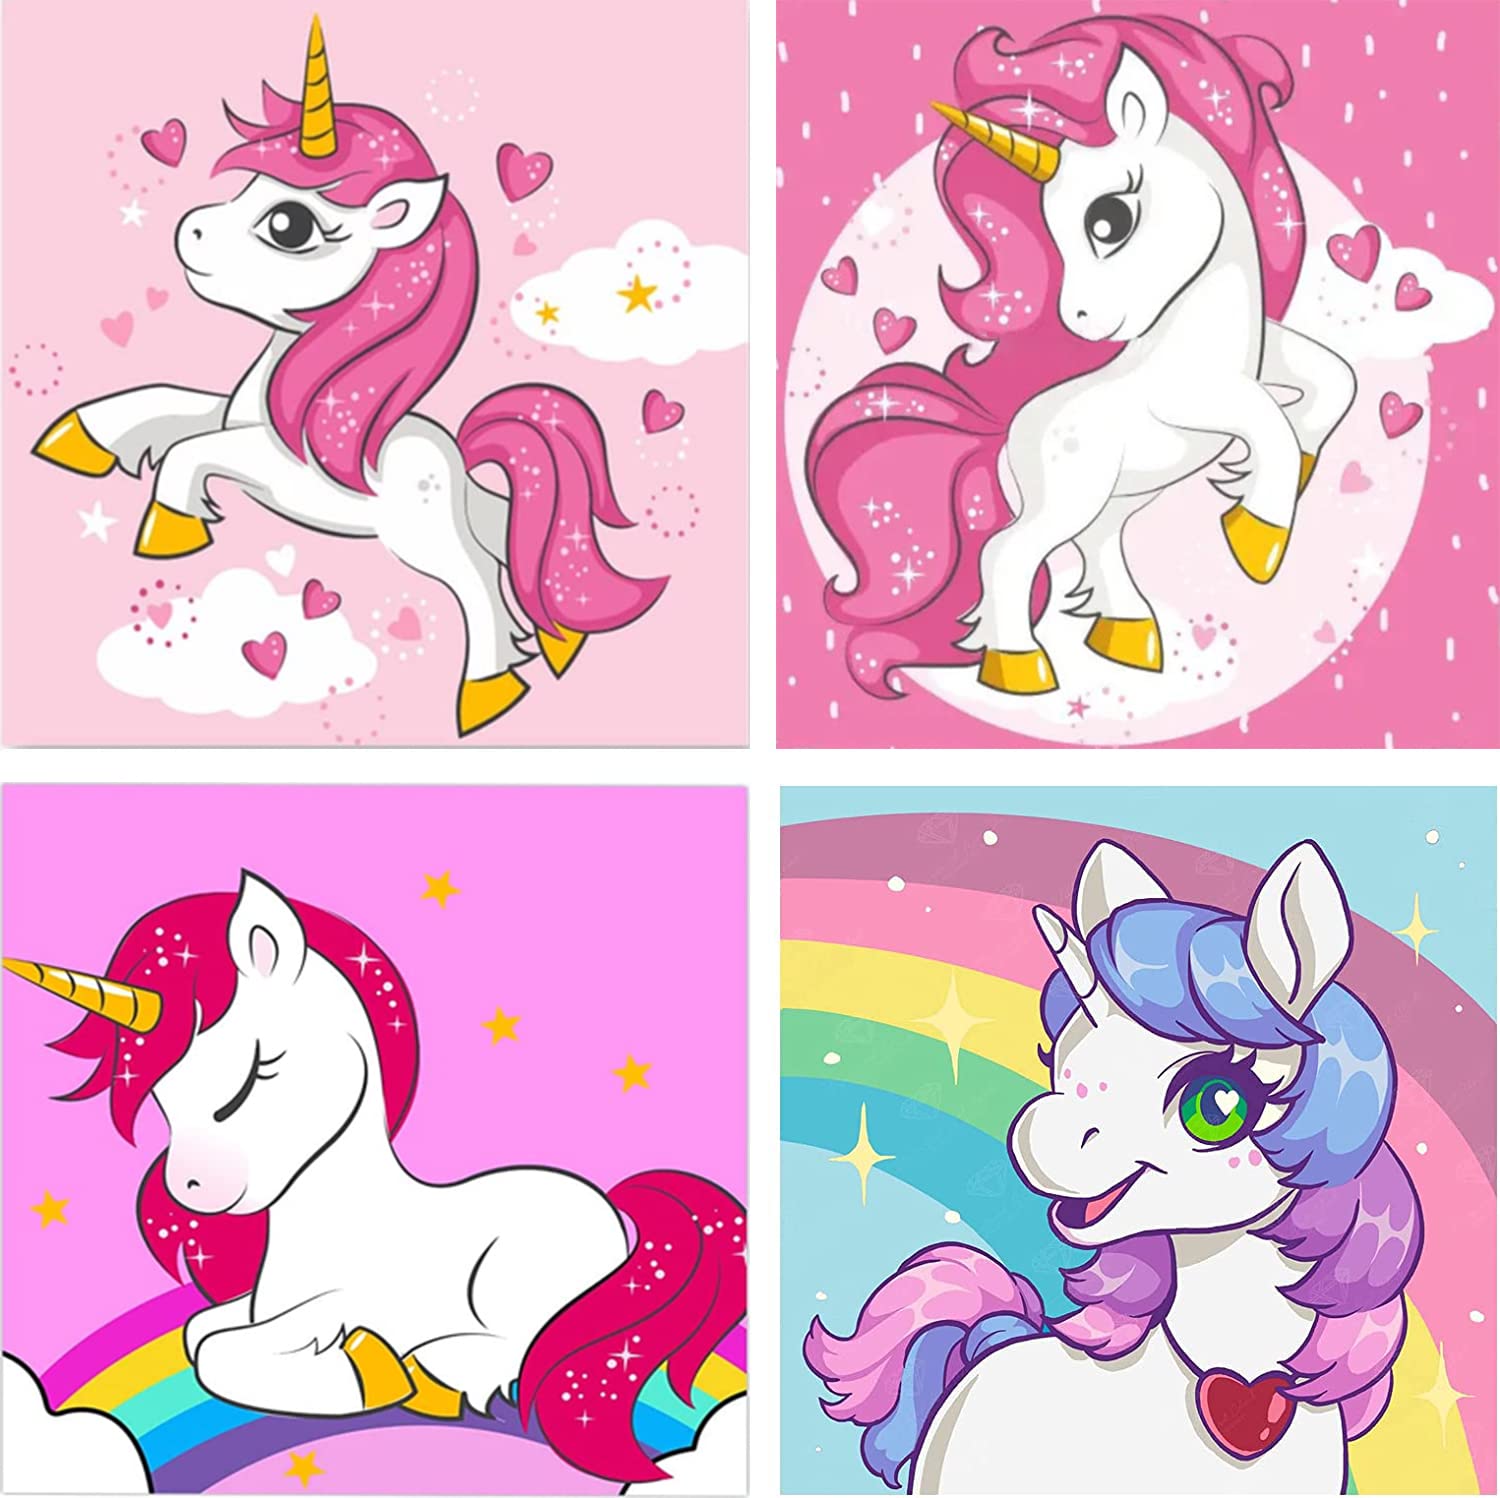 GemZono 4 Pack Paint by Numbers for Kids Colorful Unicorn DIY Oil Painting  by Number Kits on Canvas for Kids Beginner Home Wall Decor Arts (7.8 x 7.8  inch/ 20 * 20 cm) GZ-12